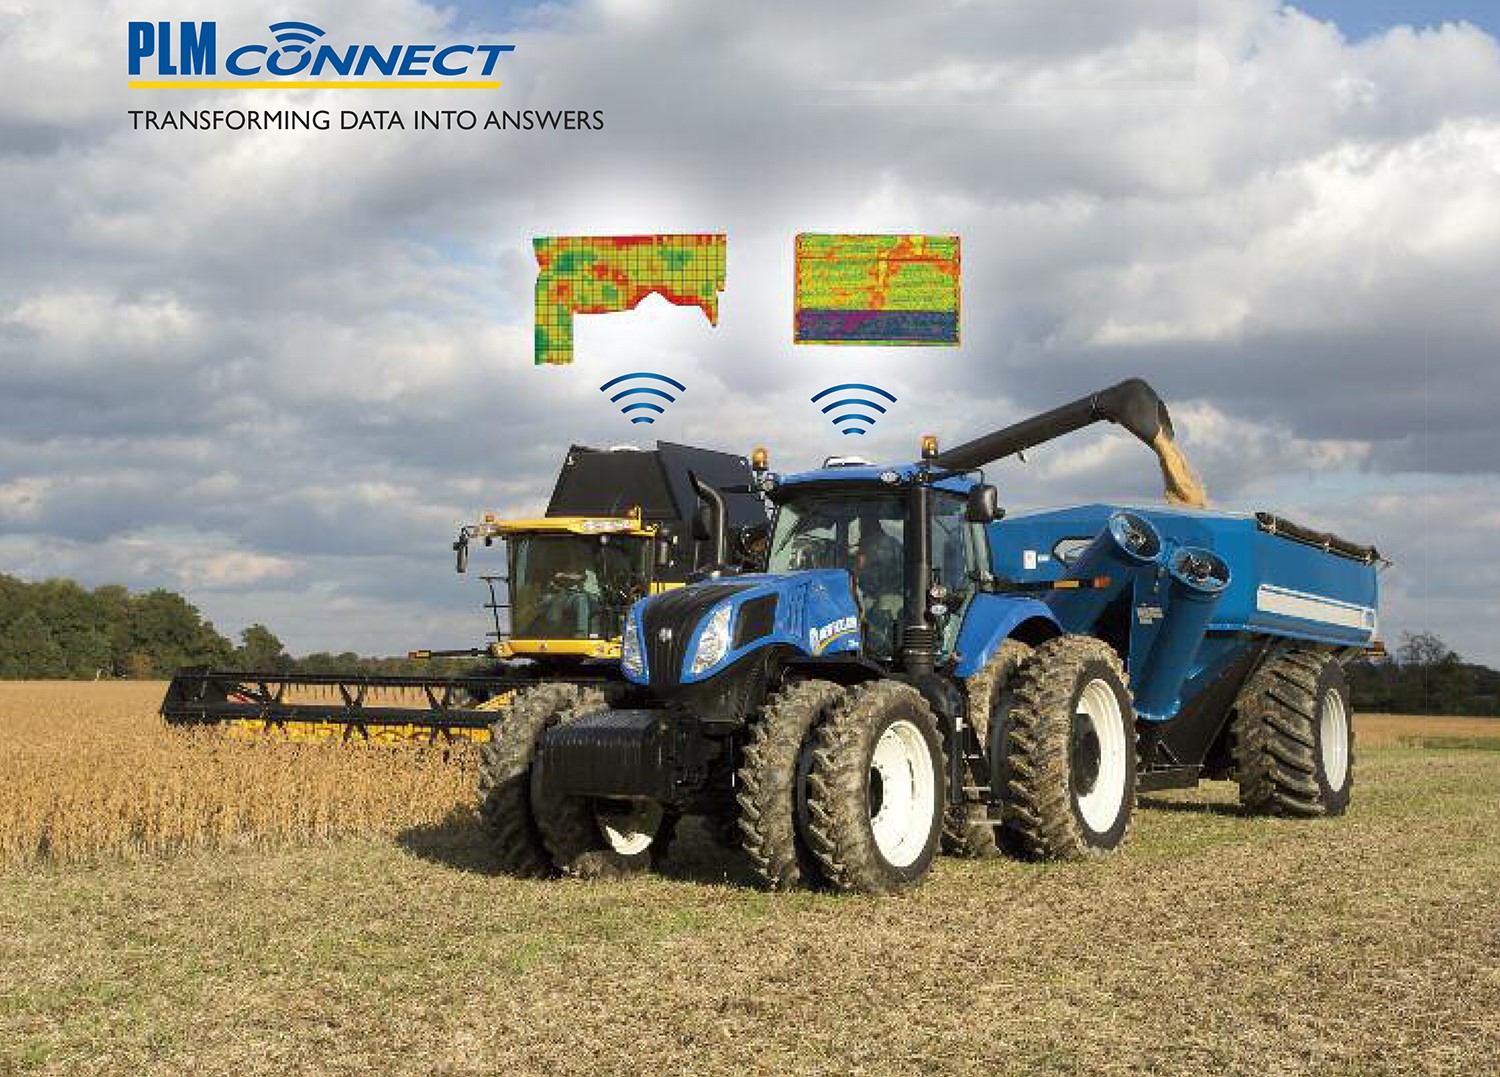 New Holland Upgrades and Extends its PLM™ Product Portfolio